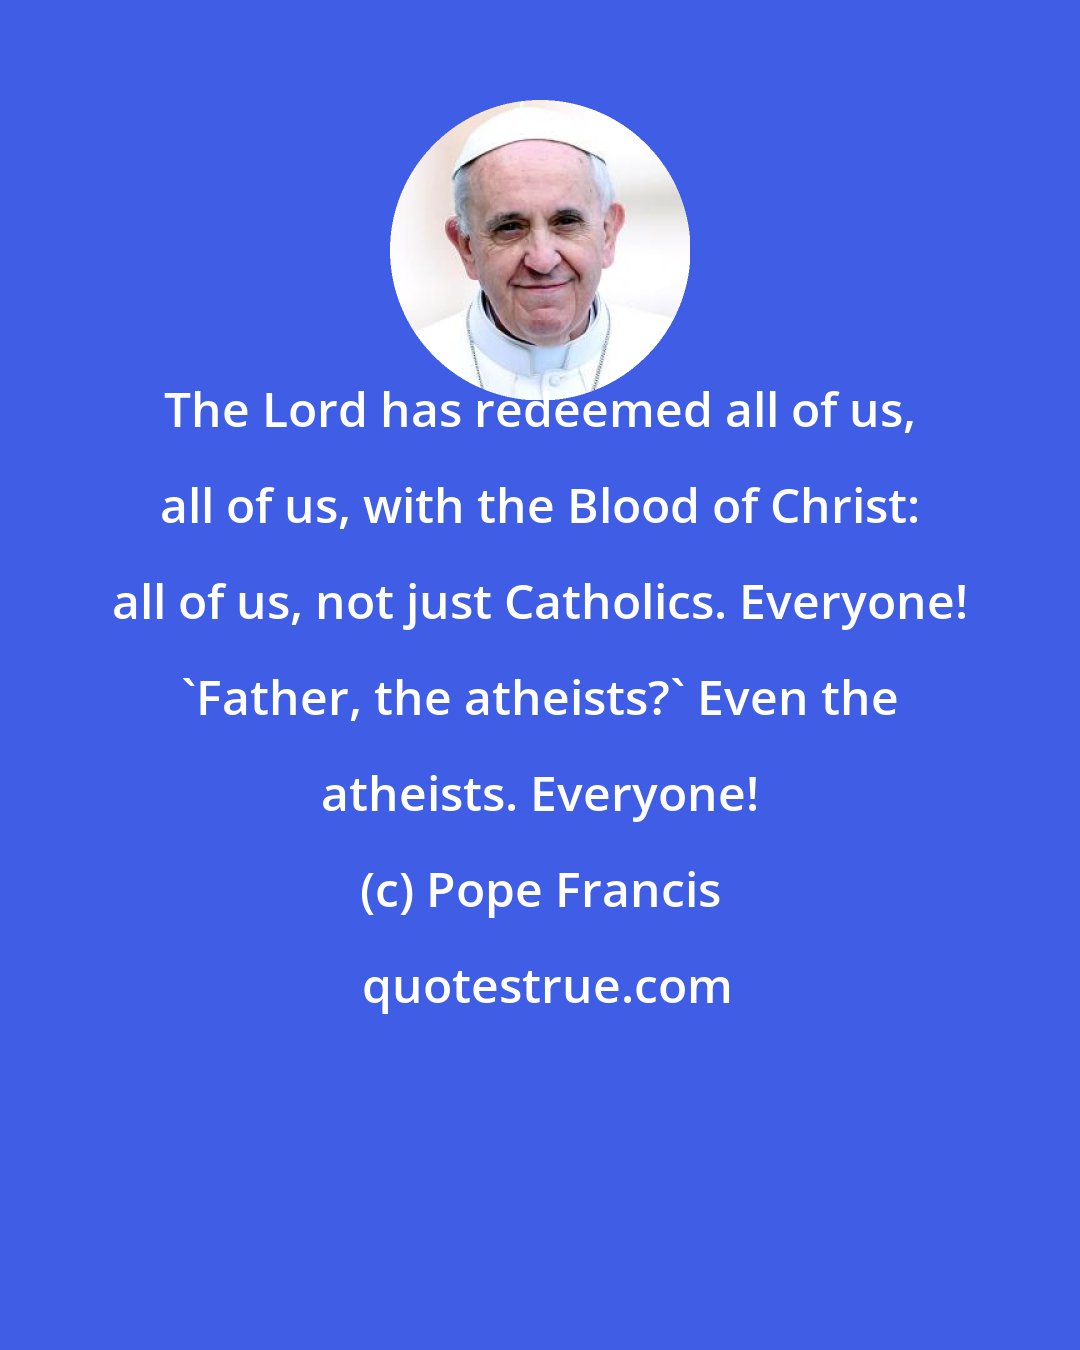 Pope Francis: The Lord has redeemed all of us, all of us, with the Blood of Christ: all of us, not just Catholics. Everyone! 'Father, the atheists?' Even the atheists. Everyone!